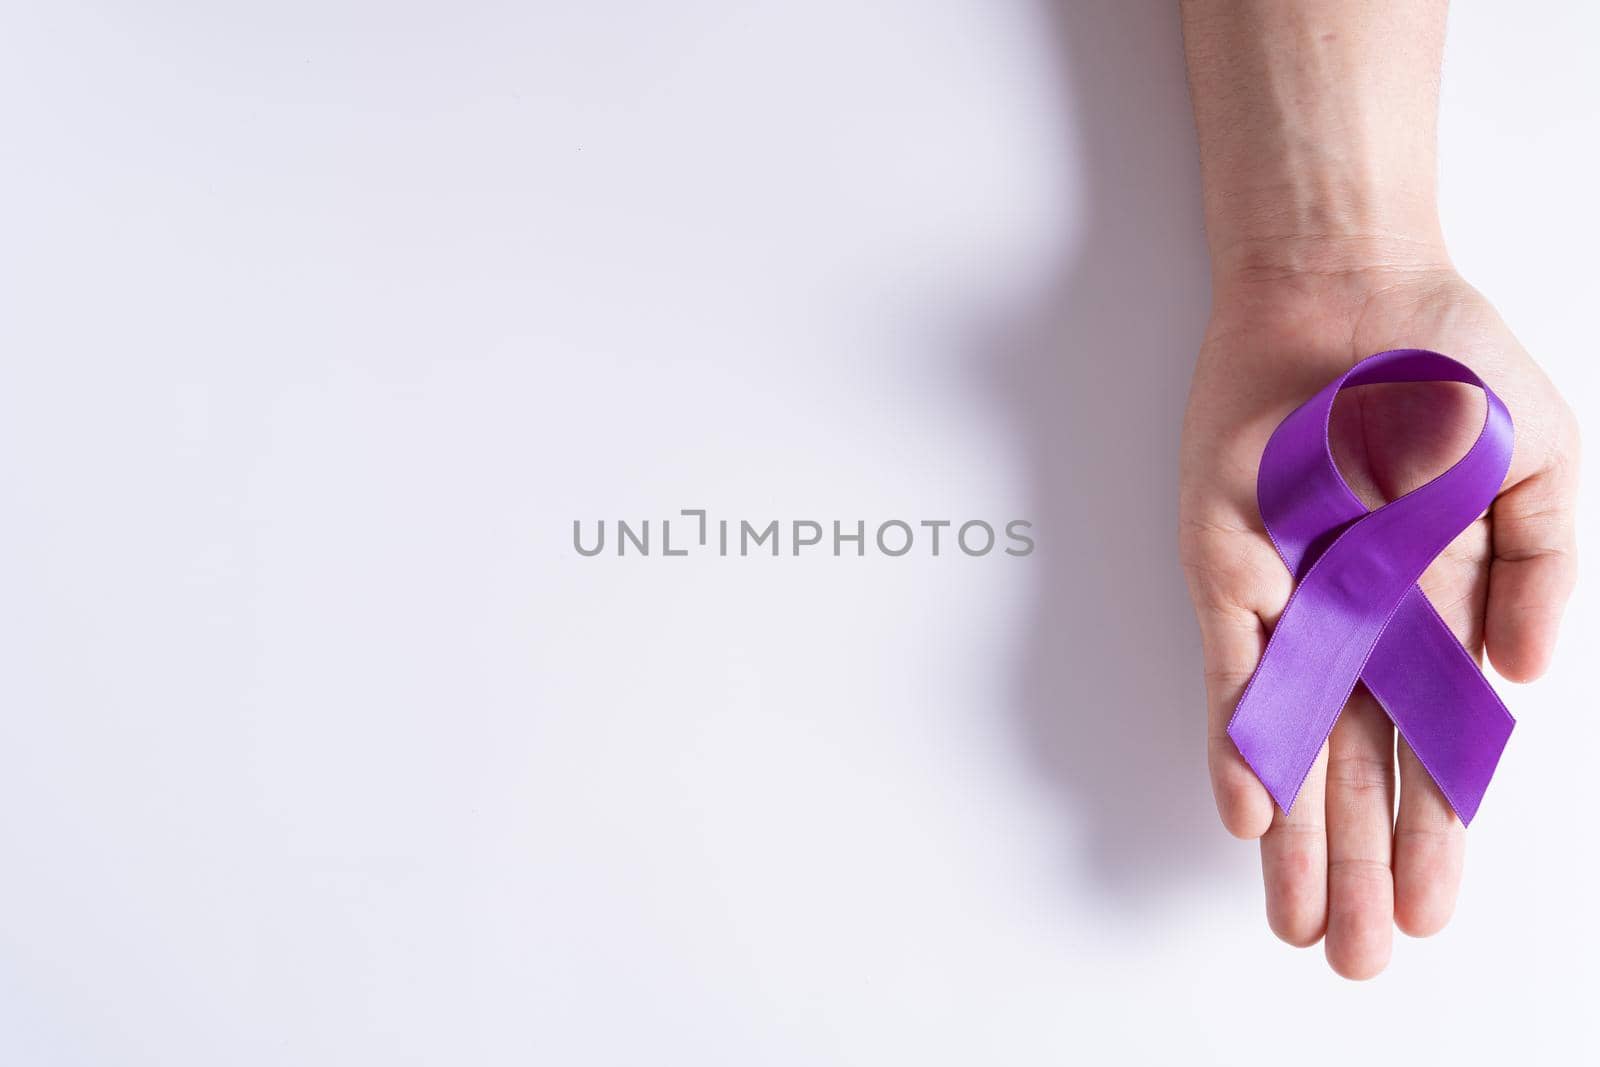 World cancer day, hands holding purple ribbon on grey background with copy space for text. Healthcare and medical concept.